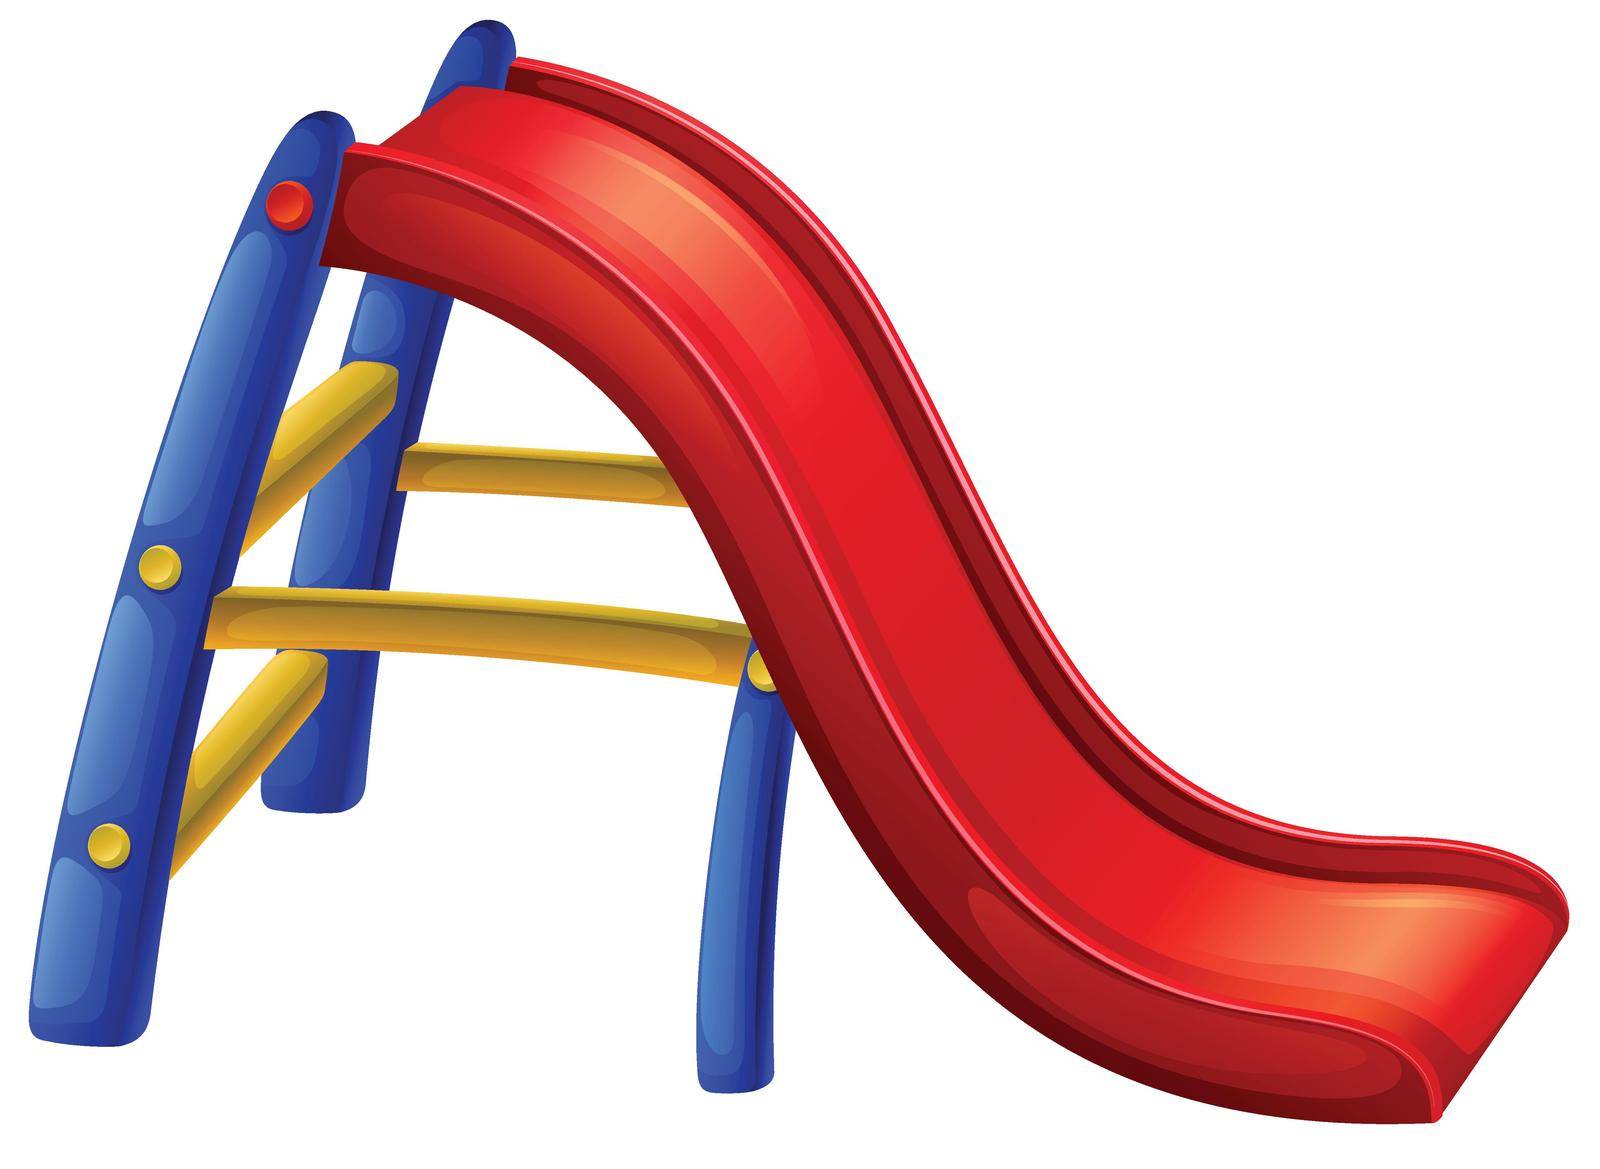 Illustration of colourful slide a on a white background